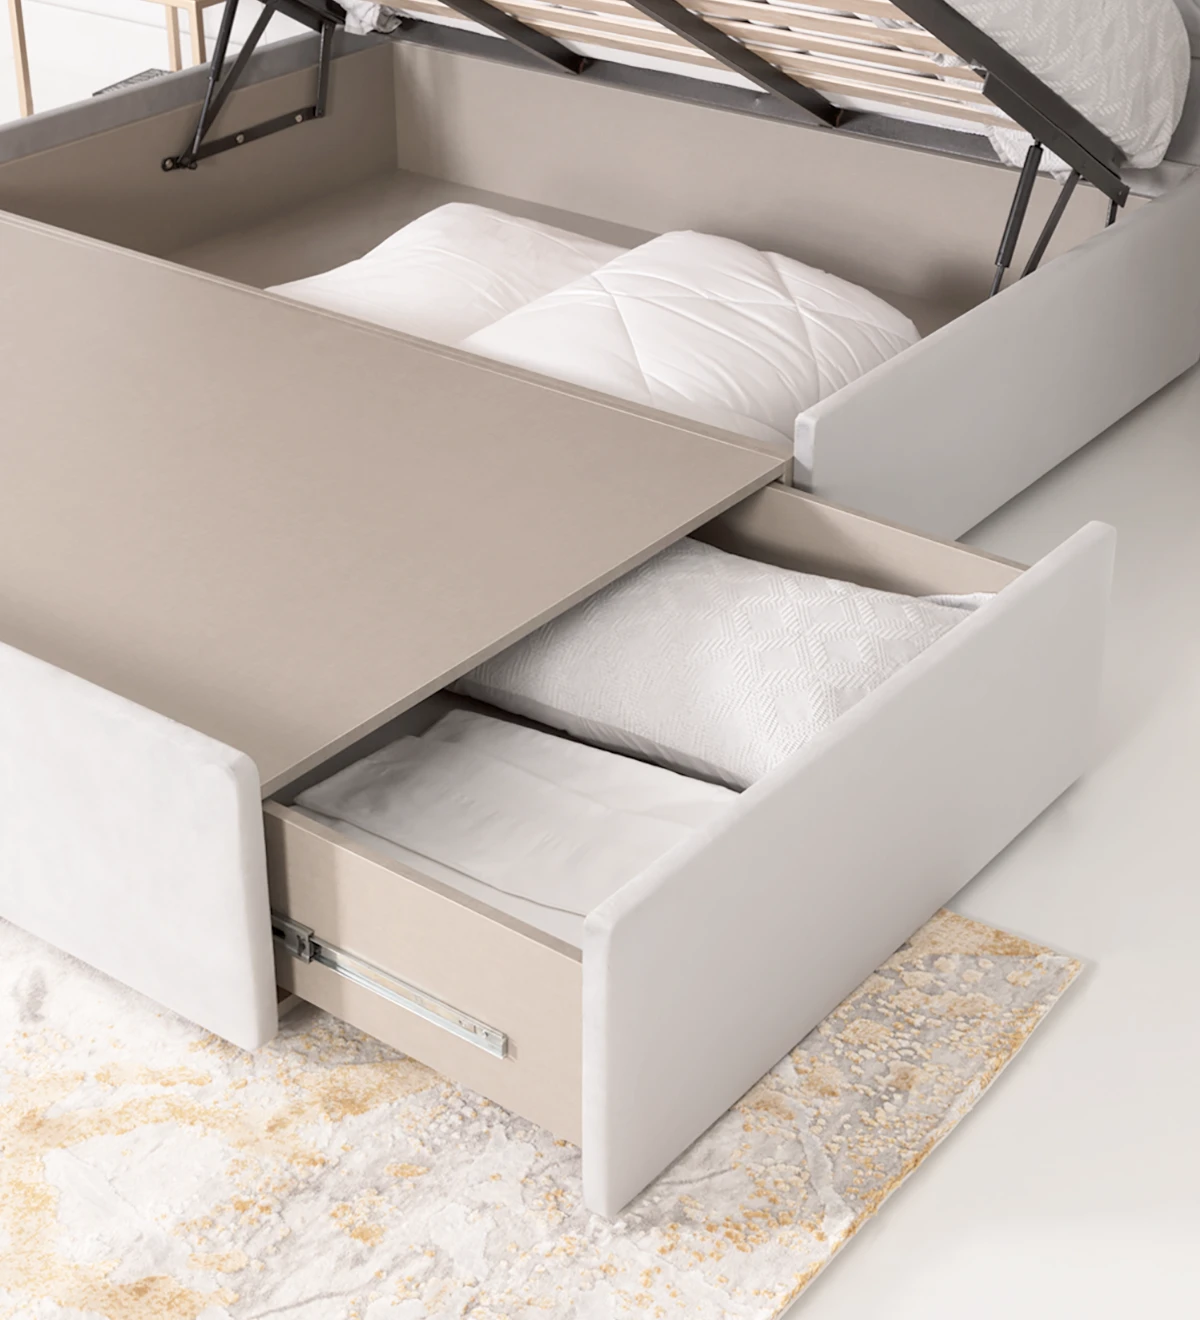 Double sommier upholstered in fabric, with lift-up bed and 2 drawers for storage.